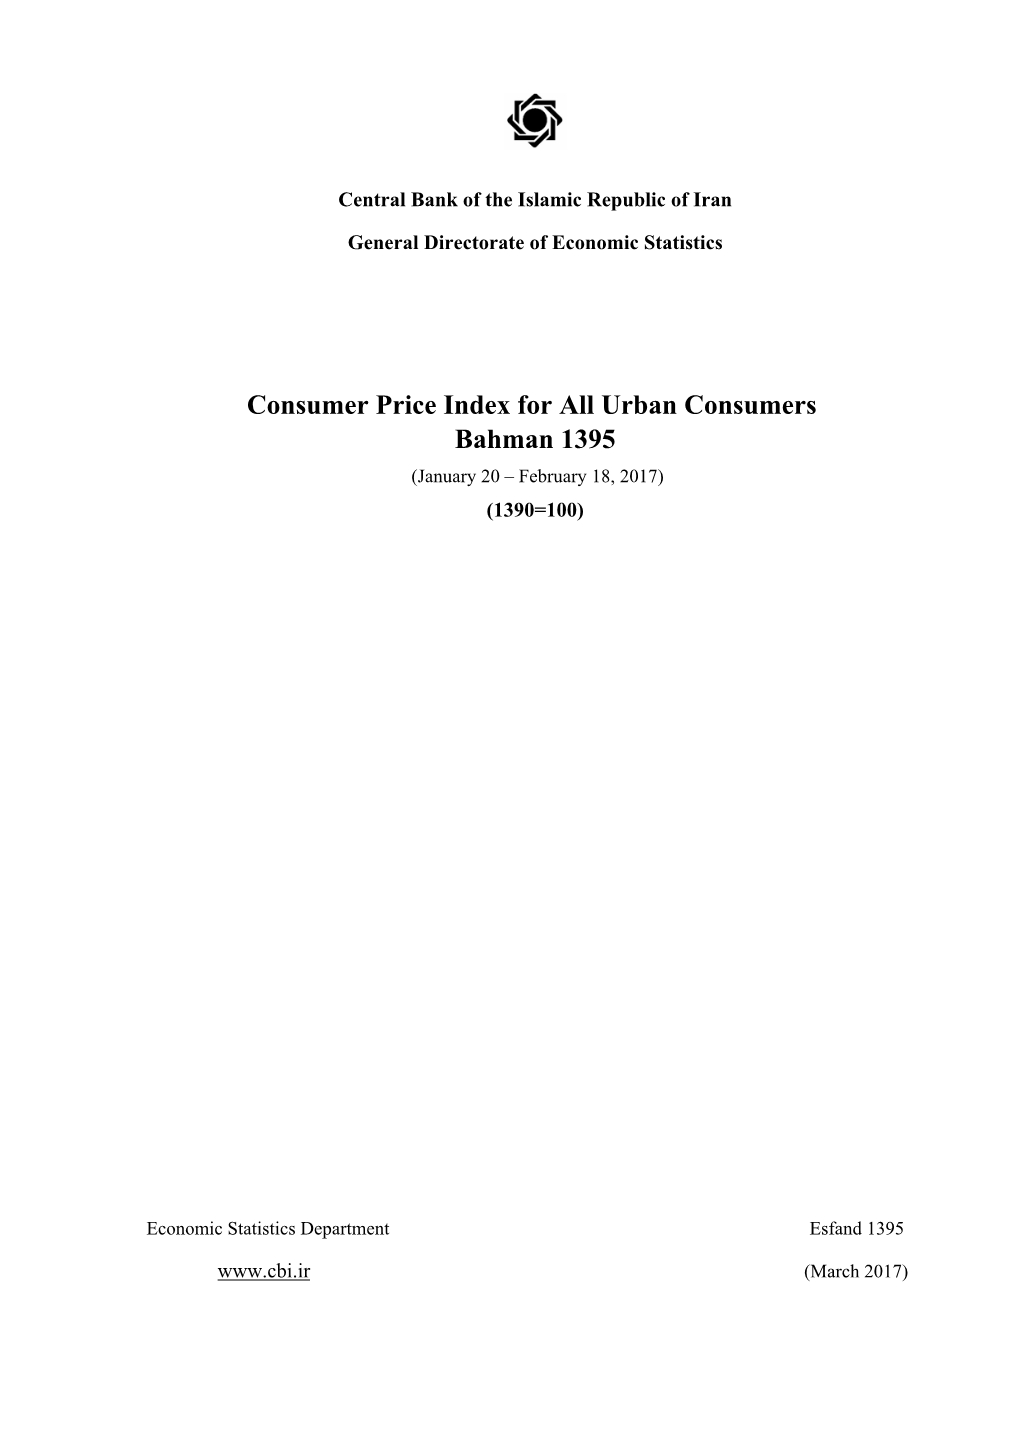 Consumer Price Index for All Urban Consumers Bahman 1395 (January 20 – February 18, 2017) (1390=100)